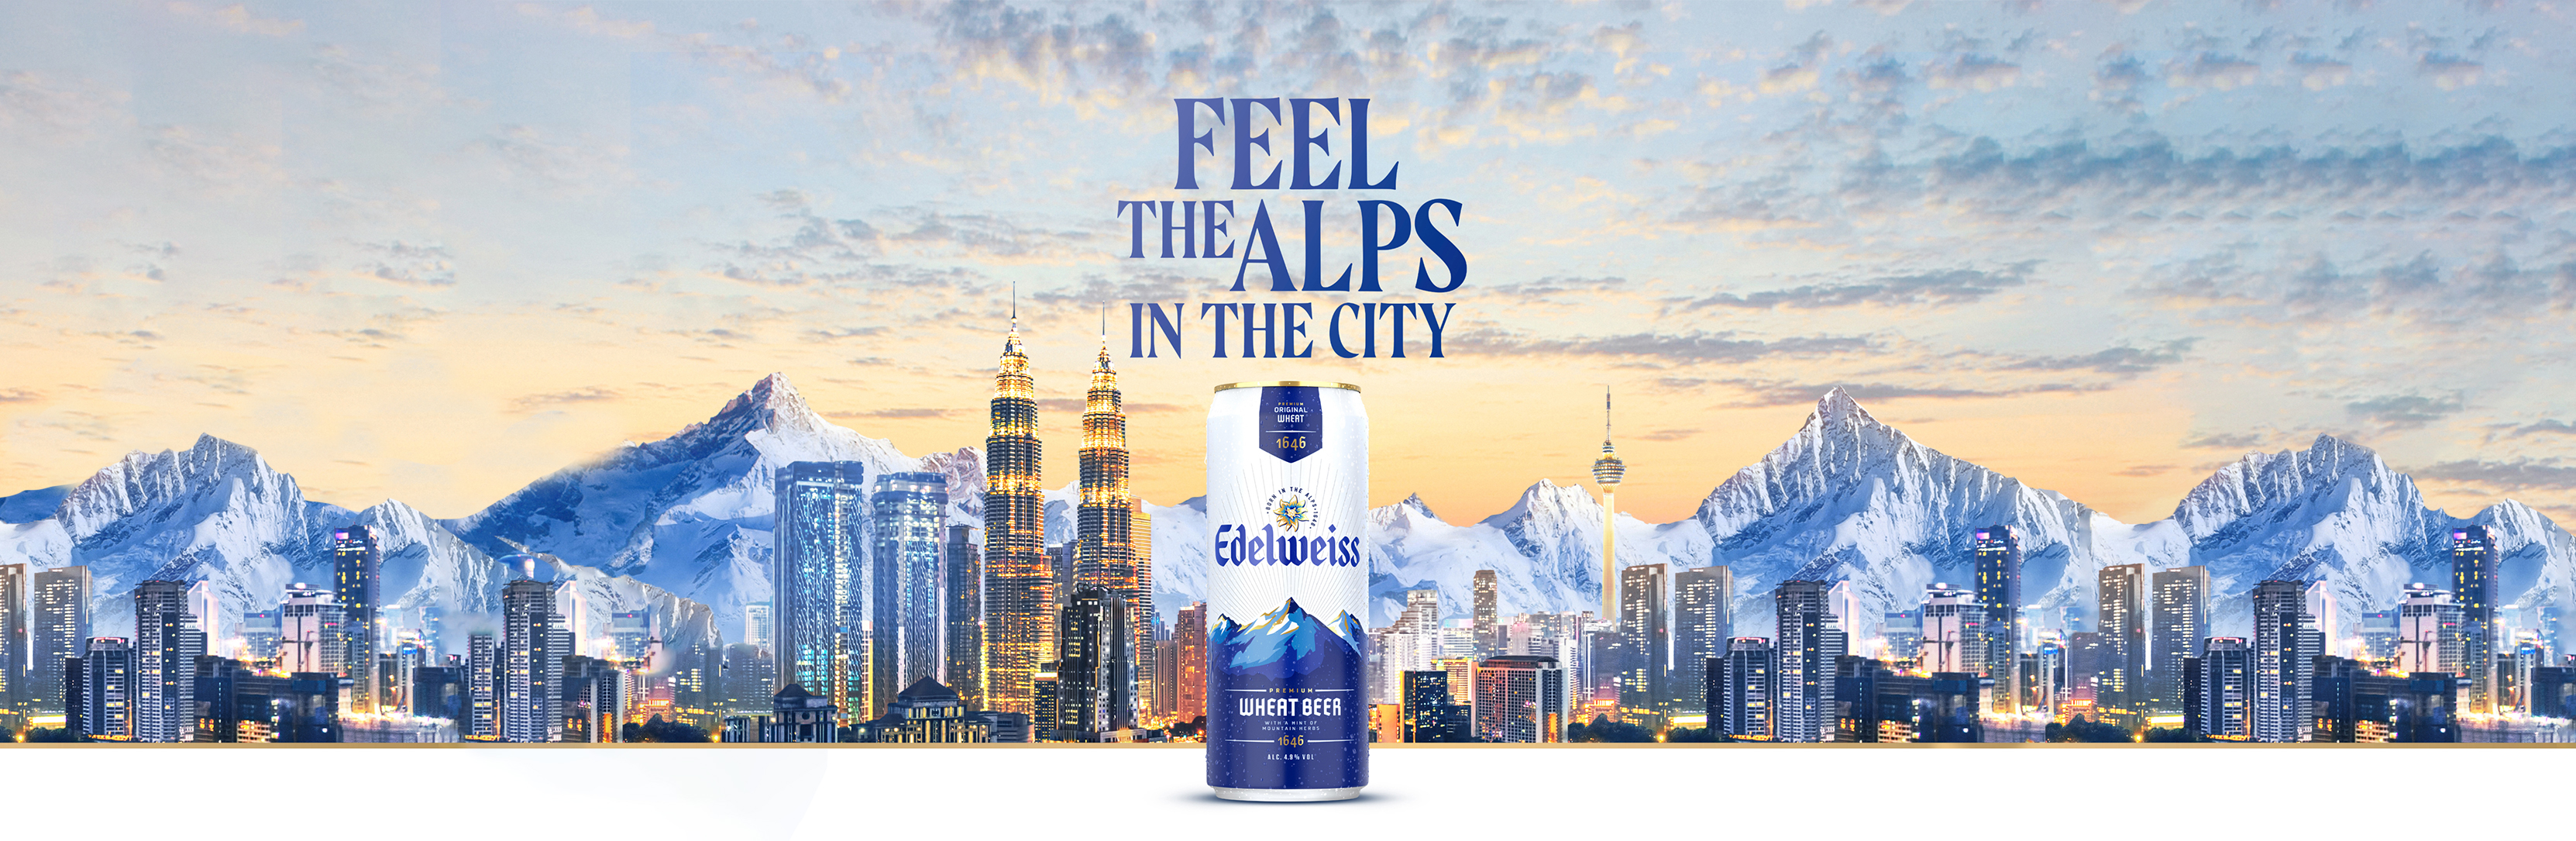 Press Release - FeelTheAlps in your City with Edelweiss_02